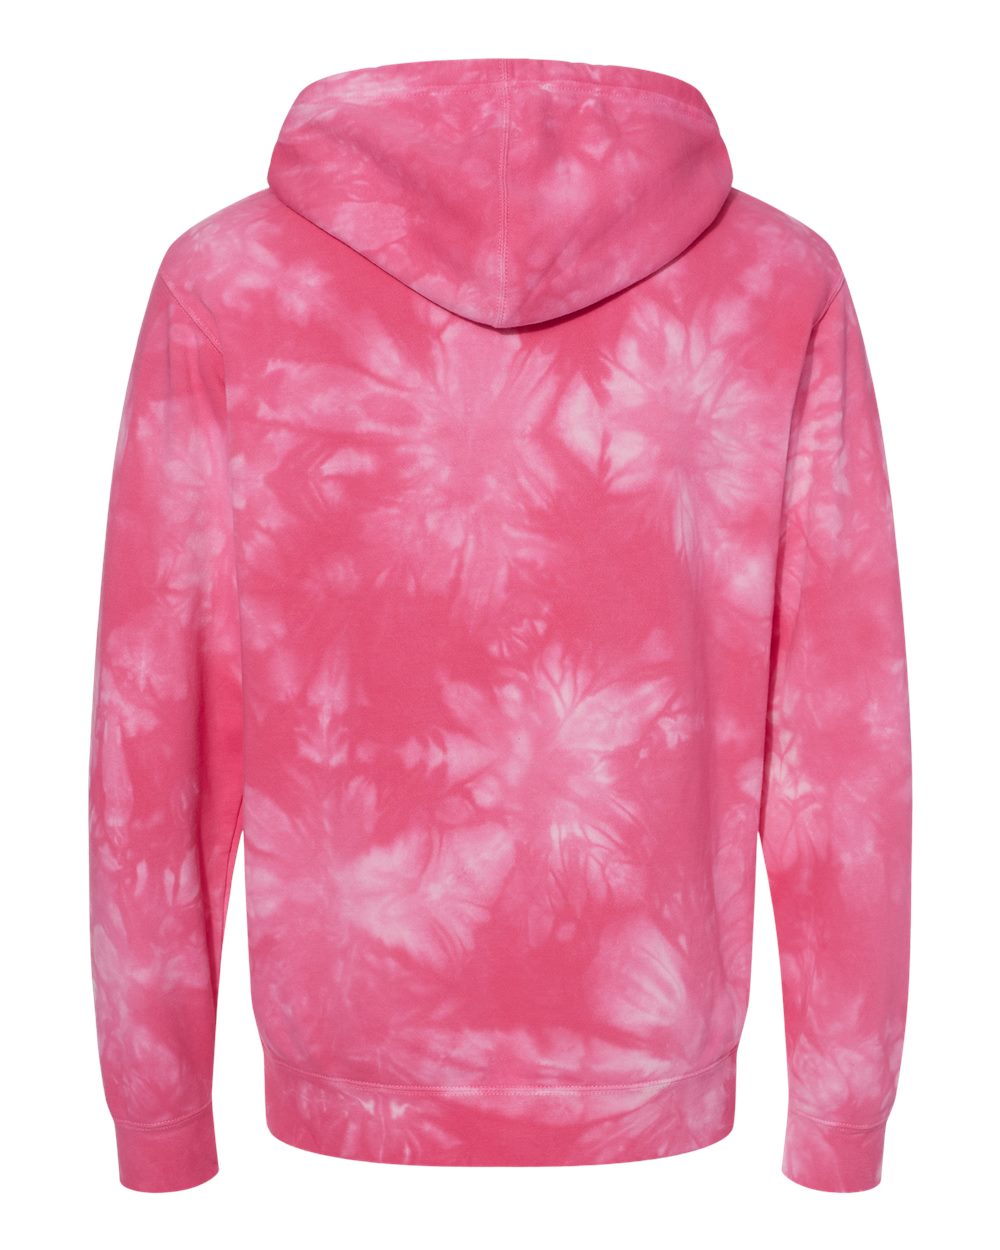 Independent Trading Co. Unisex Midweight Tie-Dyed Hooded Sweatshirt PRM4500TD #color_Tie Dye Pink